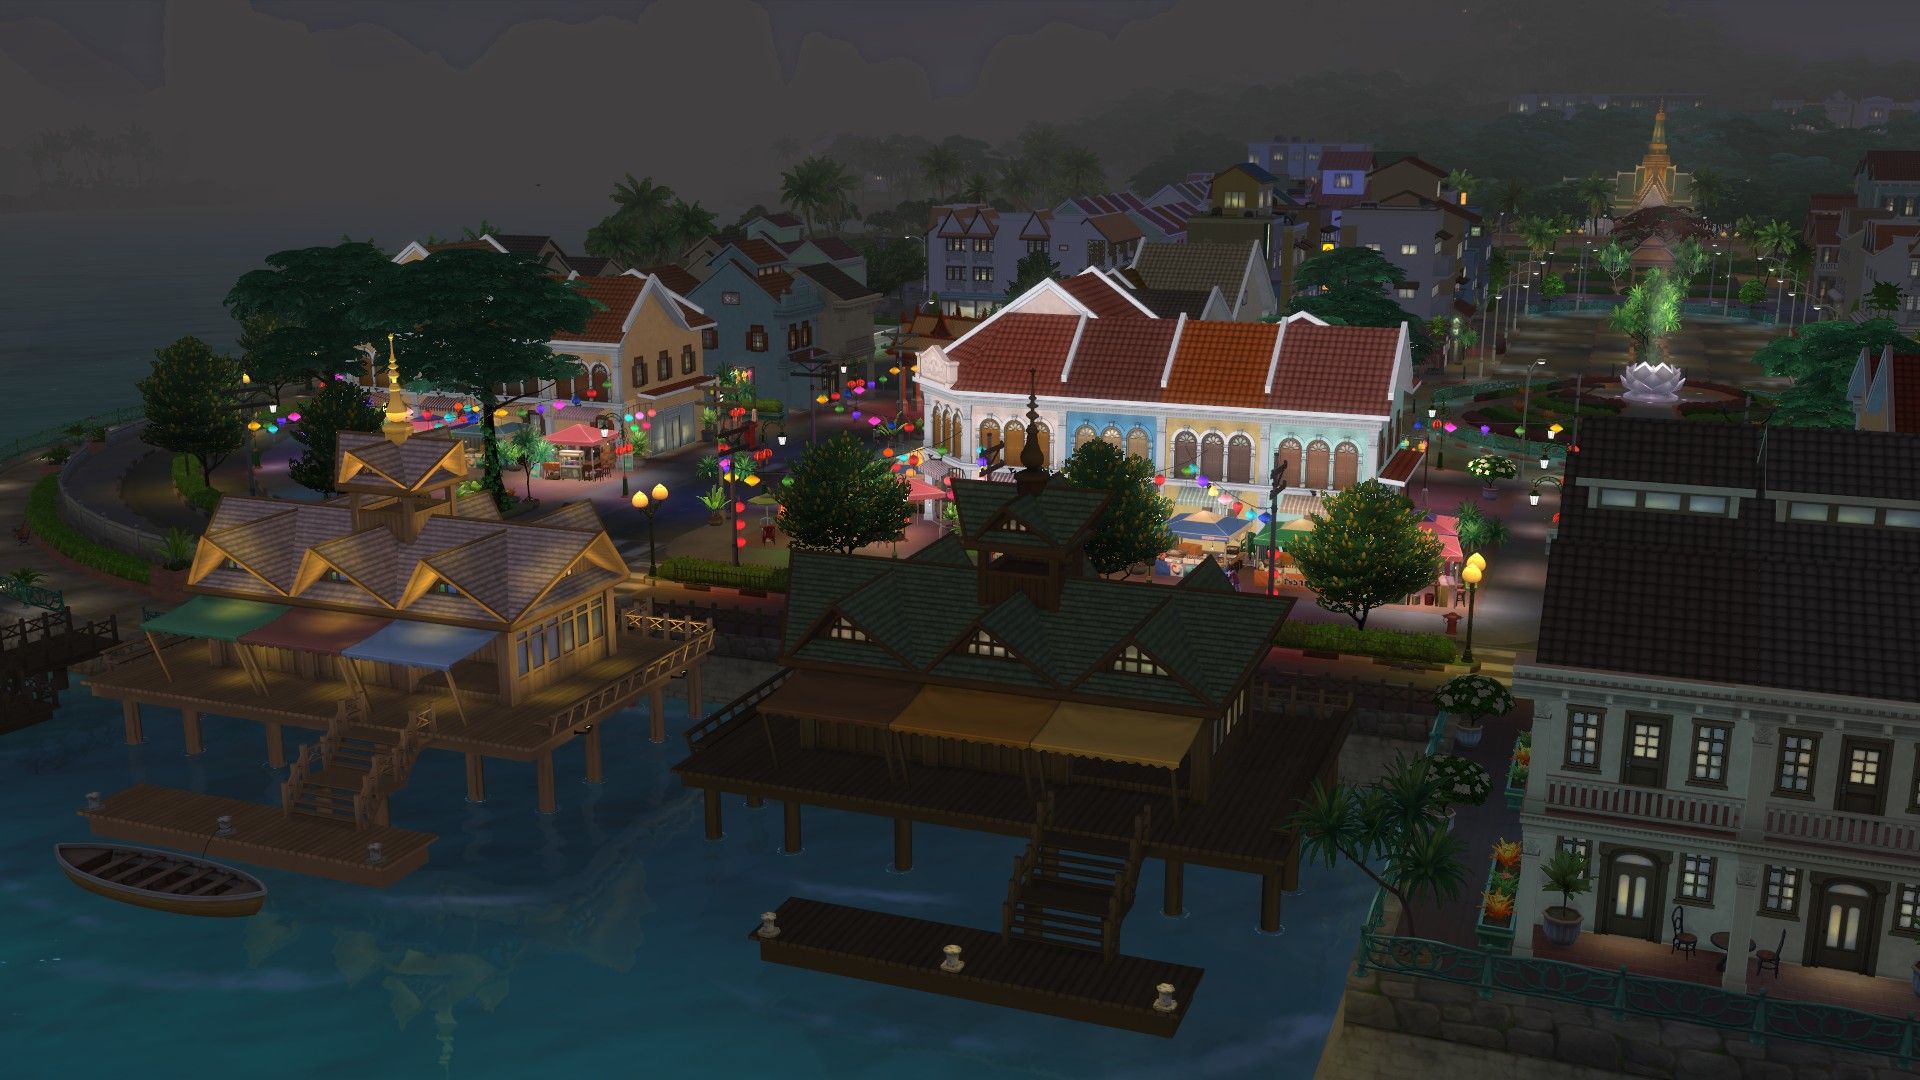 The Sims 4 For Rent Tomarang harbor showing a boat in the water and the night market area lit by lanterns and a temple in the distance.